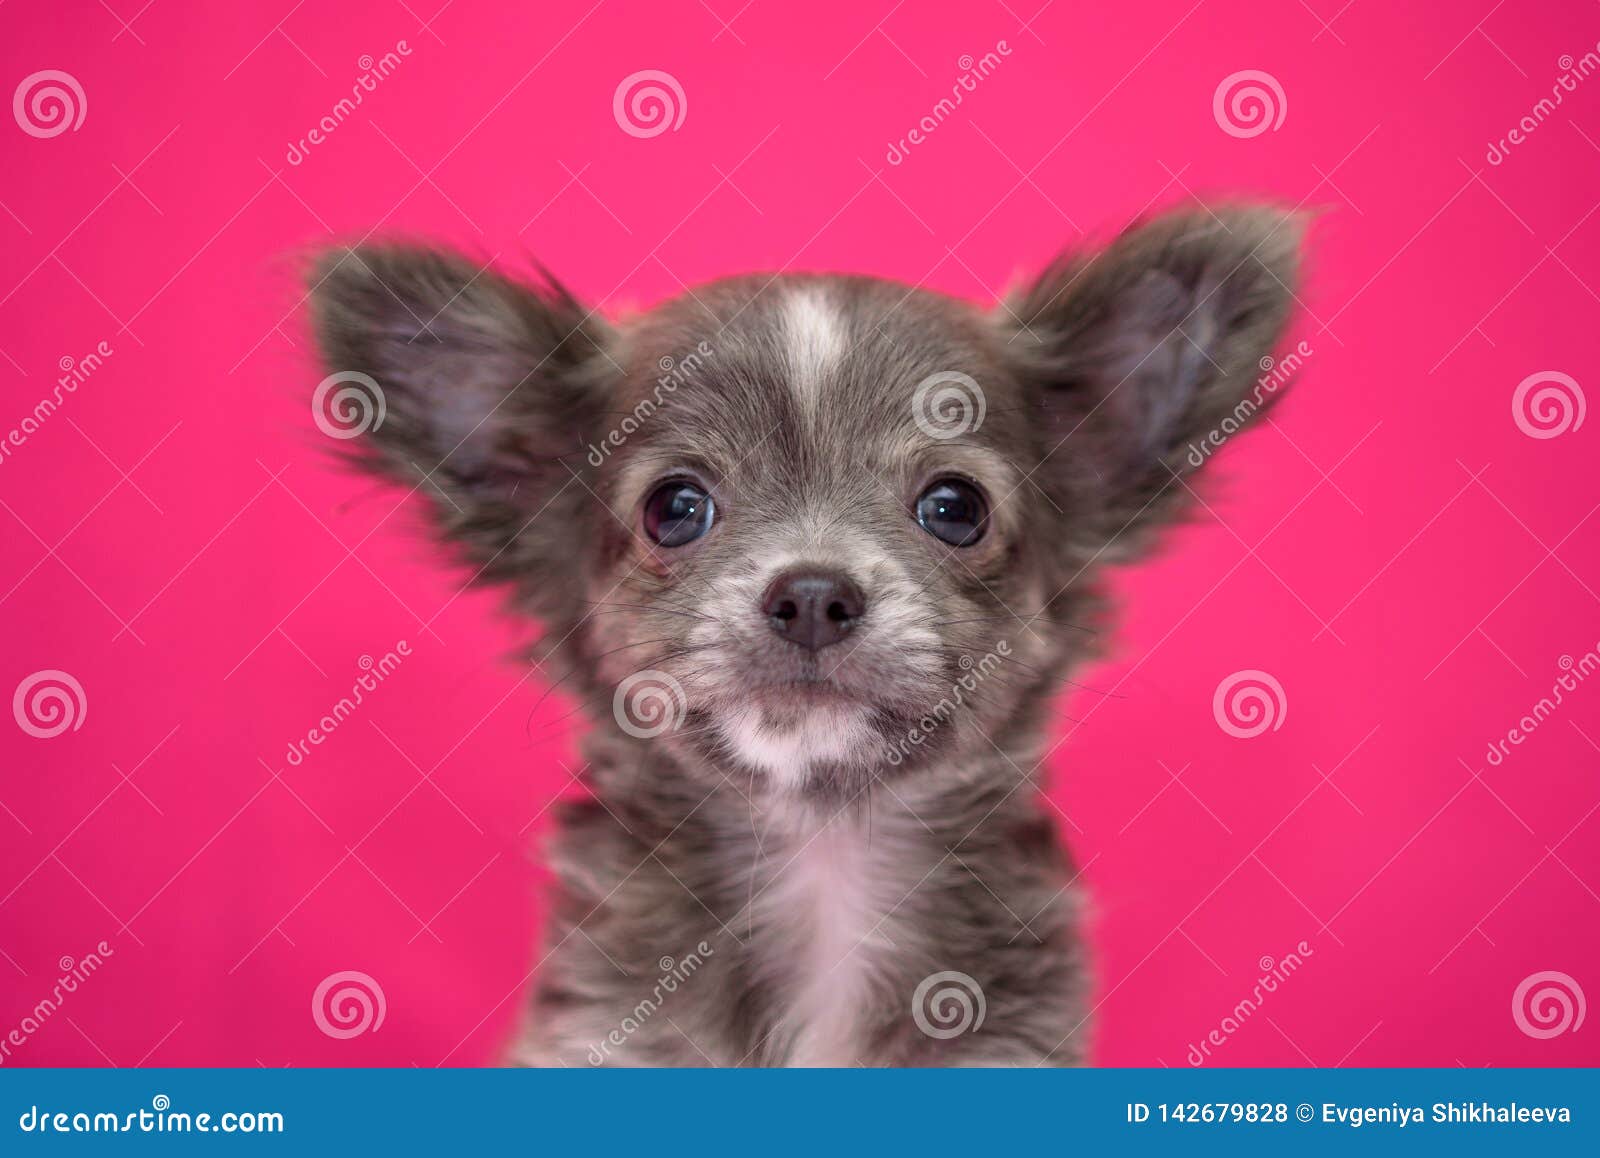 Cute Red Haired Chihuahua Puppy Sits On A Crimson Background